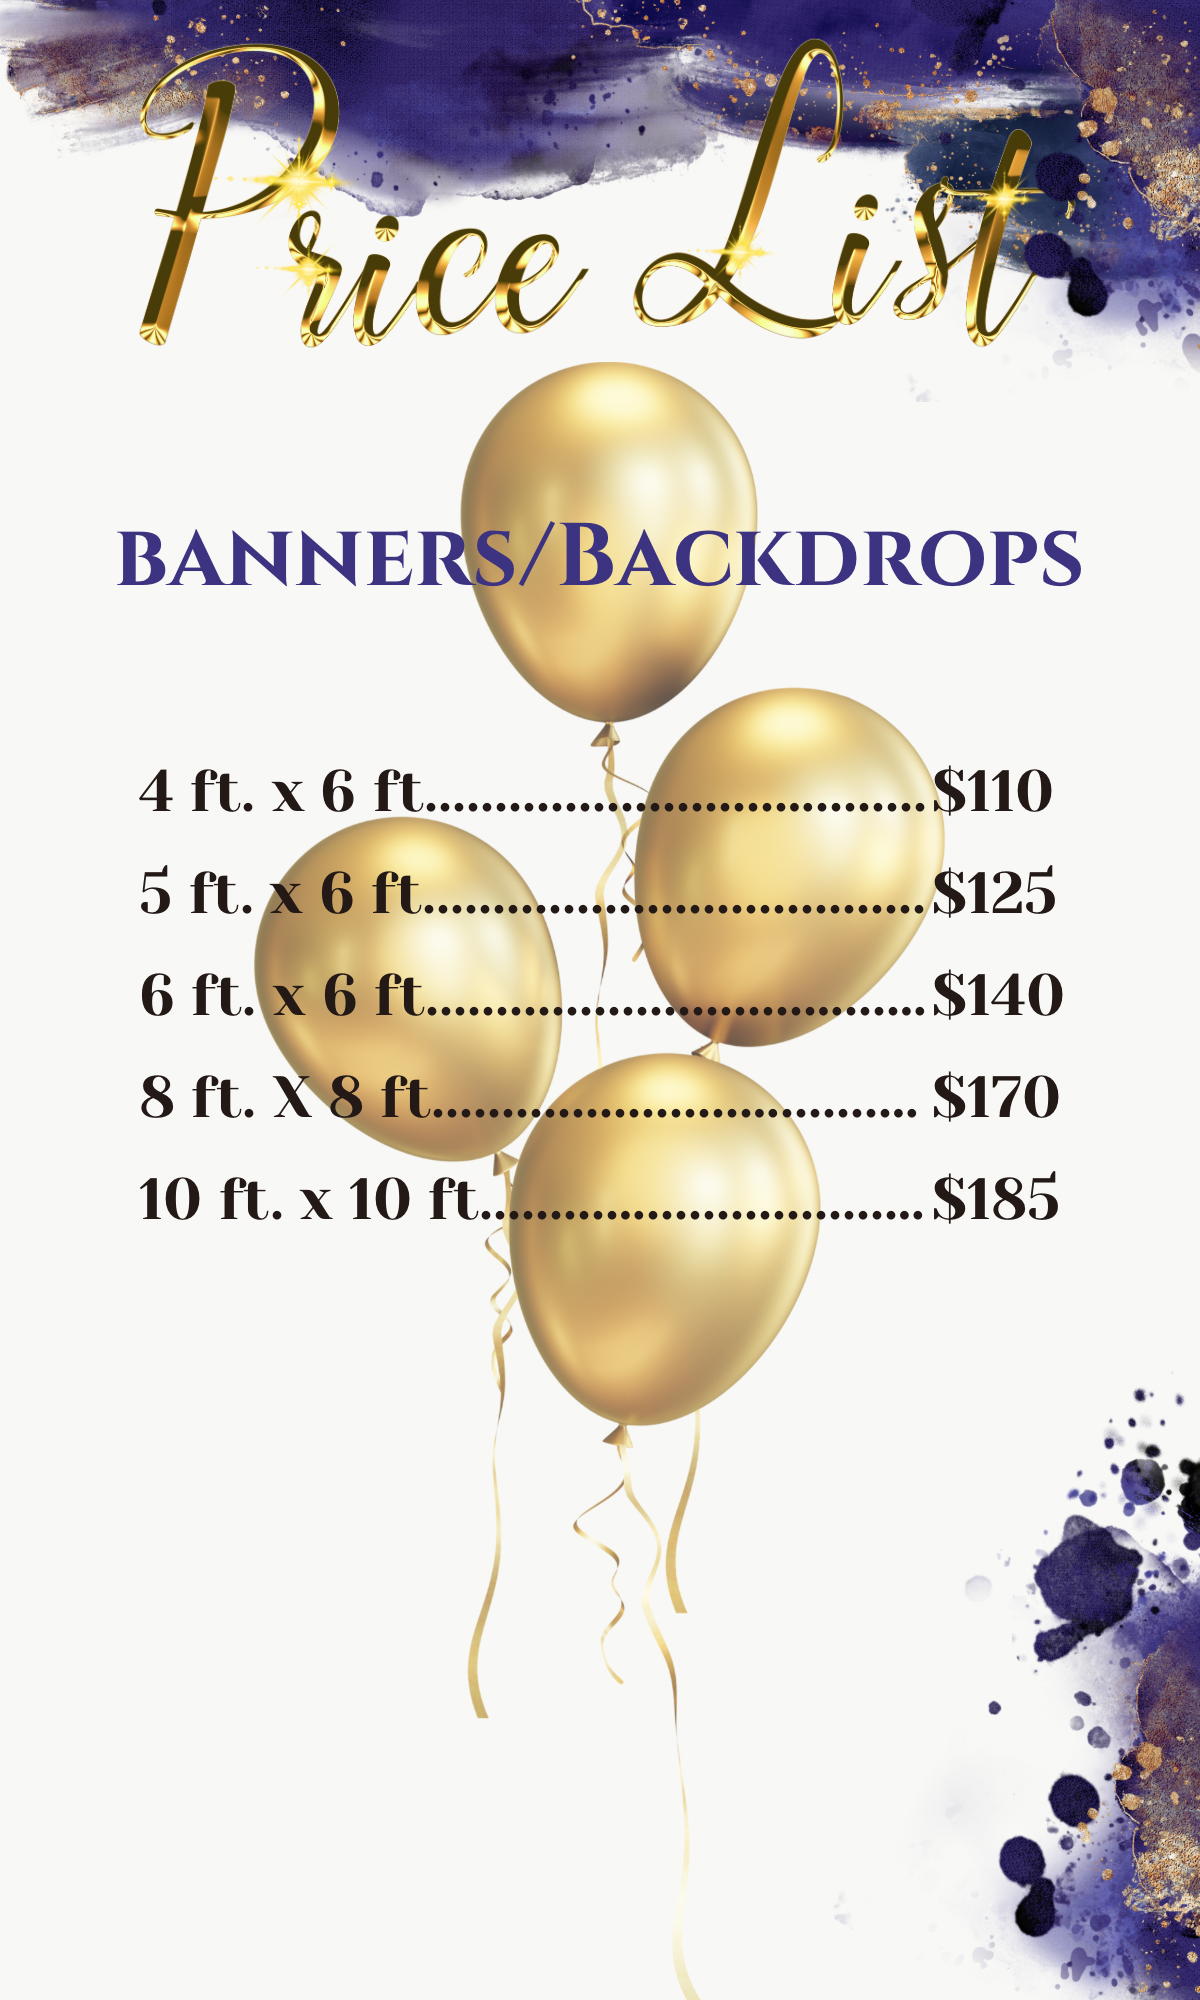 Banners/Backdrops